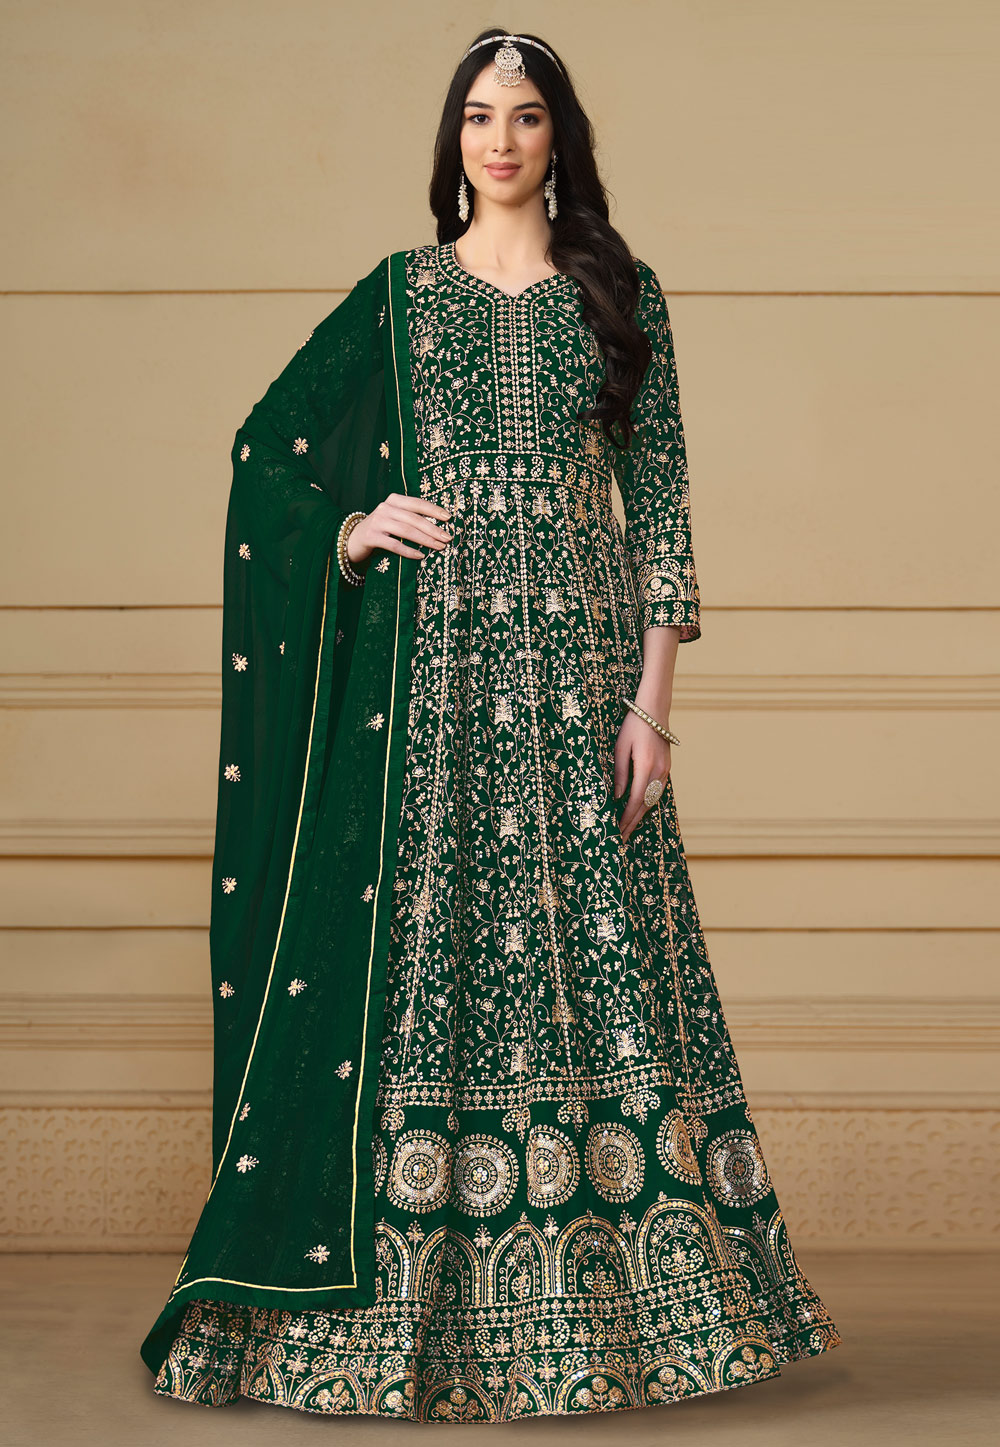 Green Faux Georgette Embroidered Anarkali Suit 283855